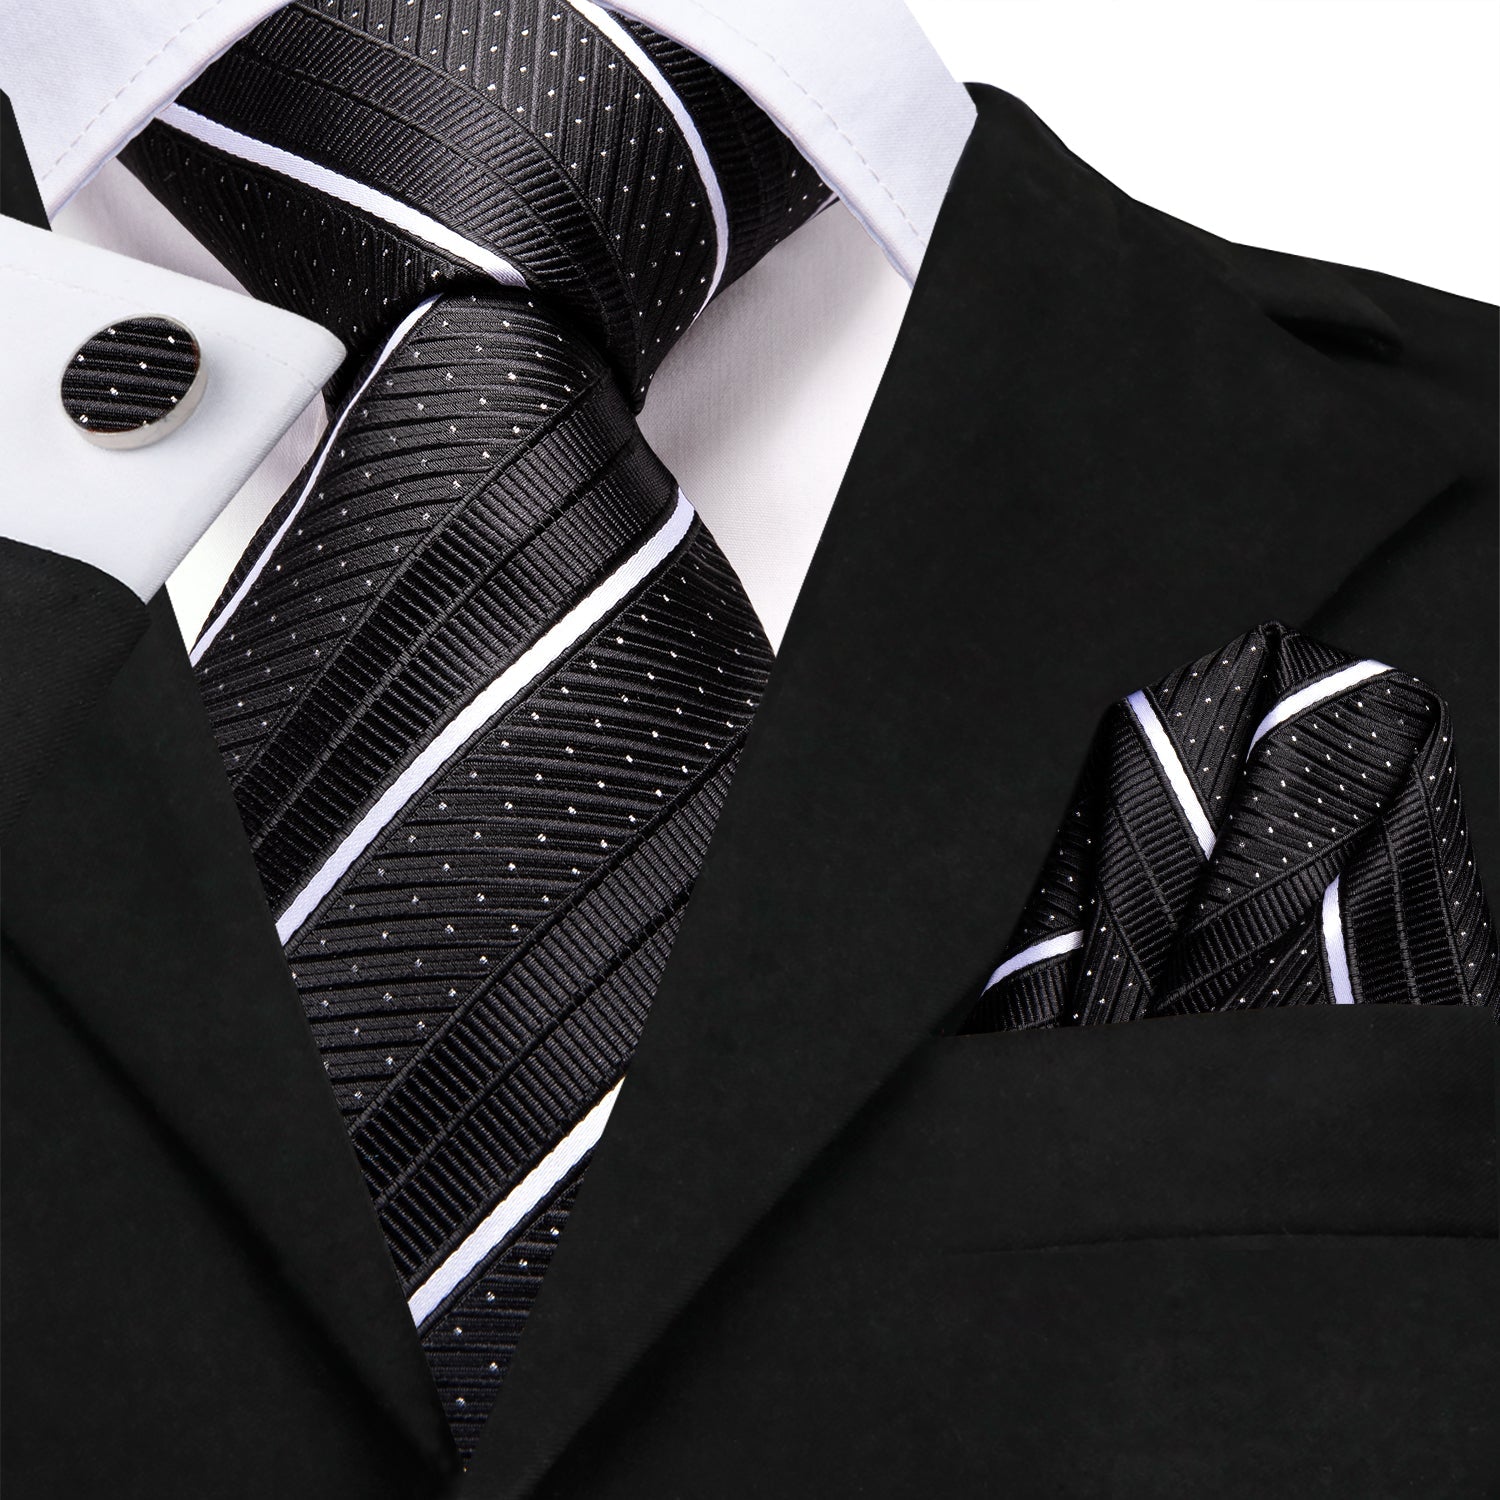 Black Strip with White Dot 67 Inches Extra Long Necktie Pocket Square Cufflinks Set